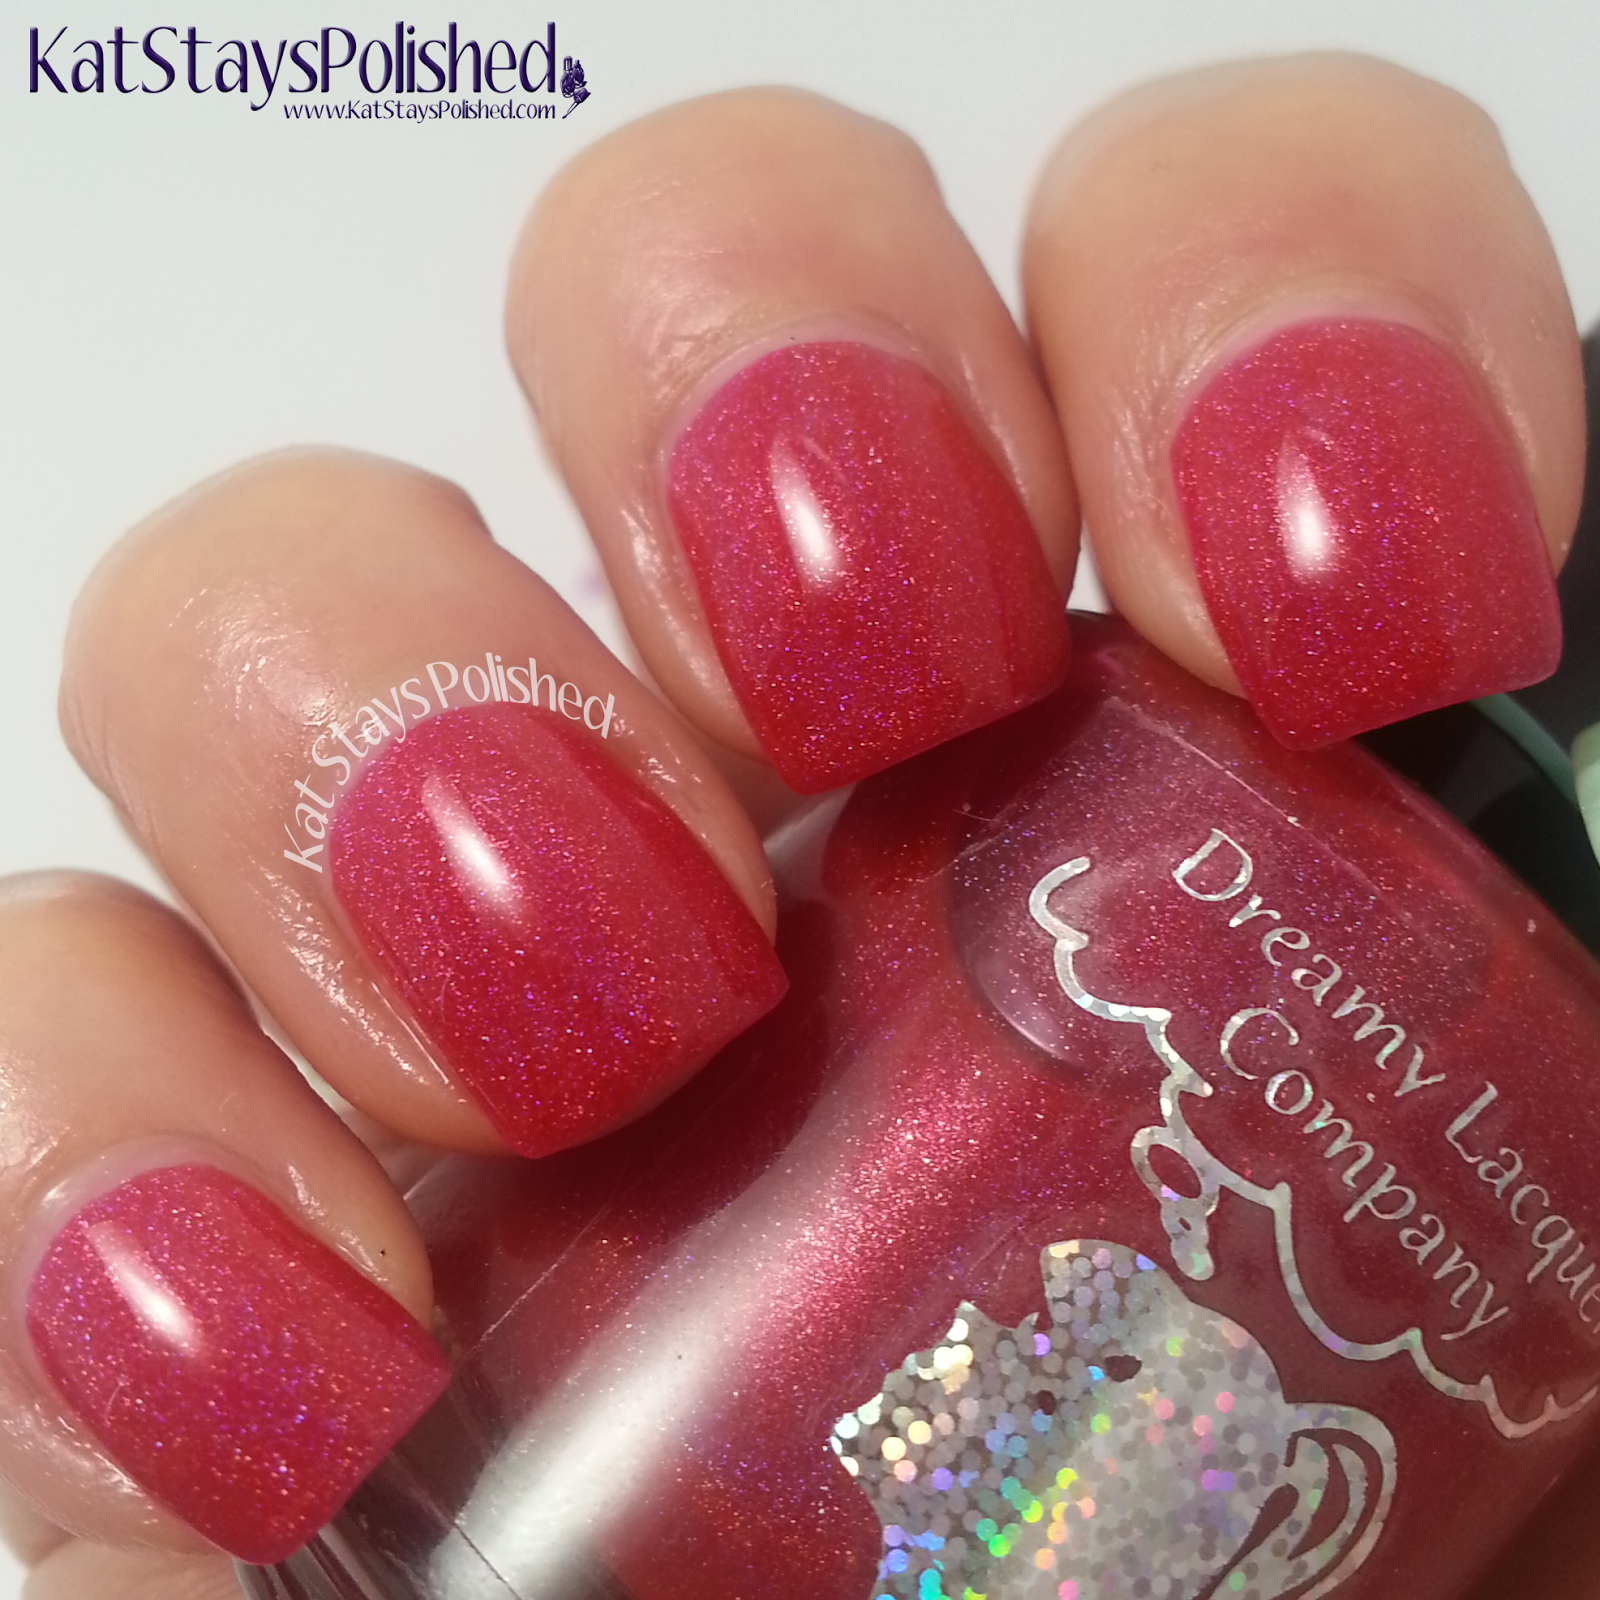 Dreamy Lacquer Company - Celebration in the NailNation | Kat Stays Polished